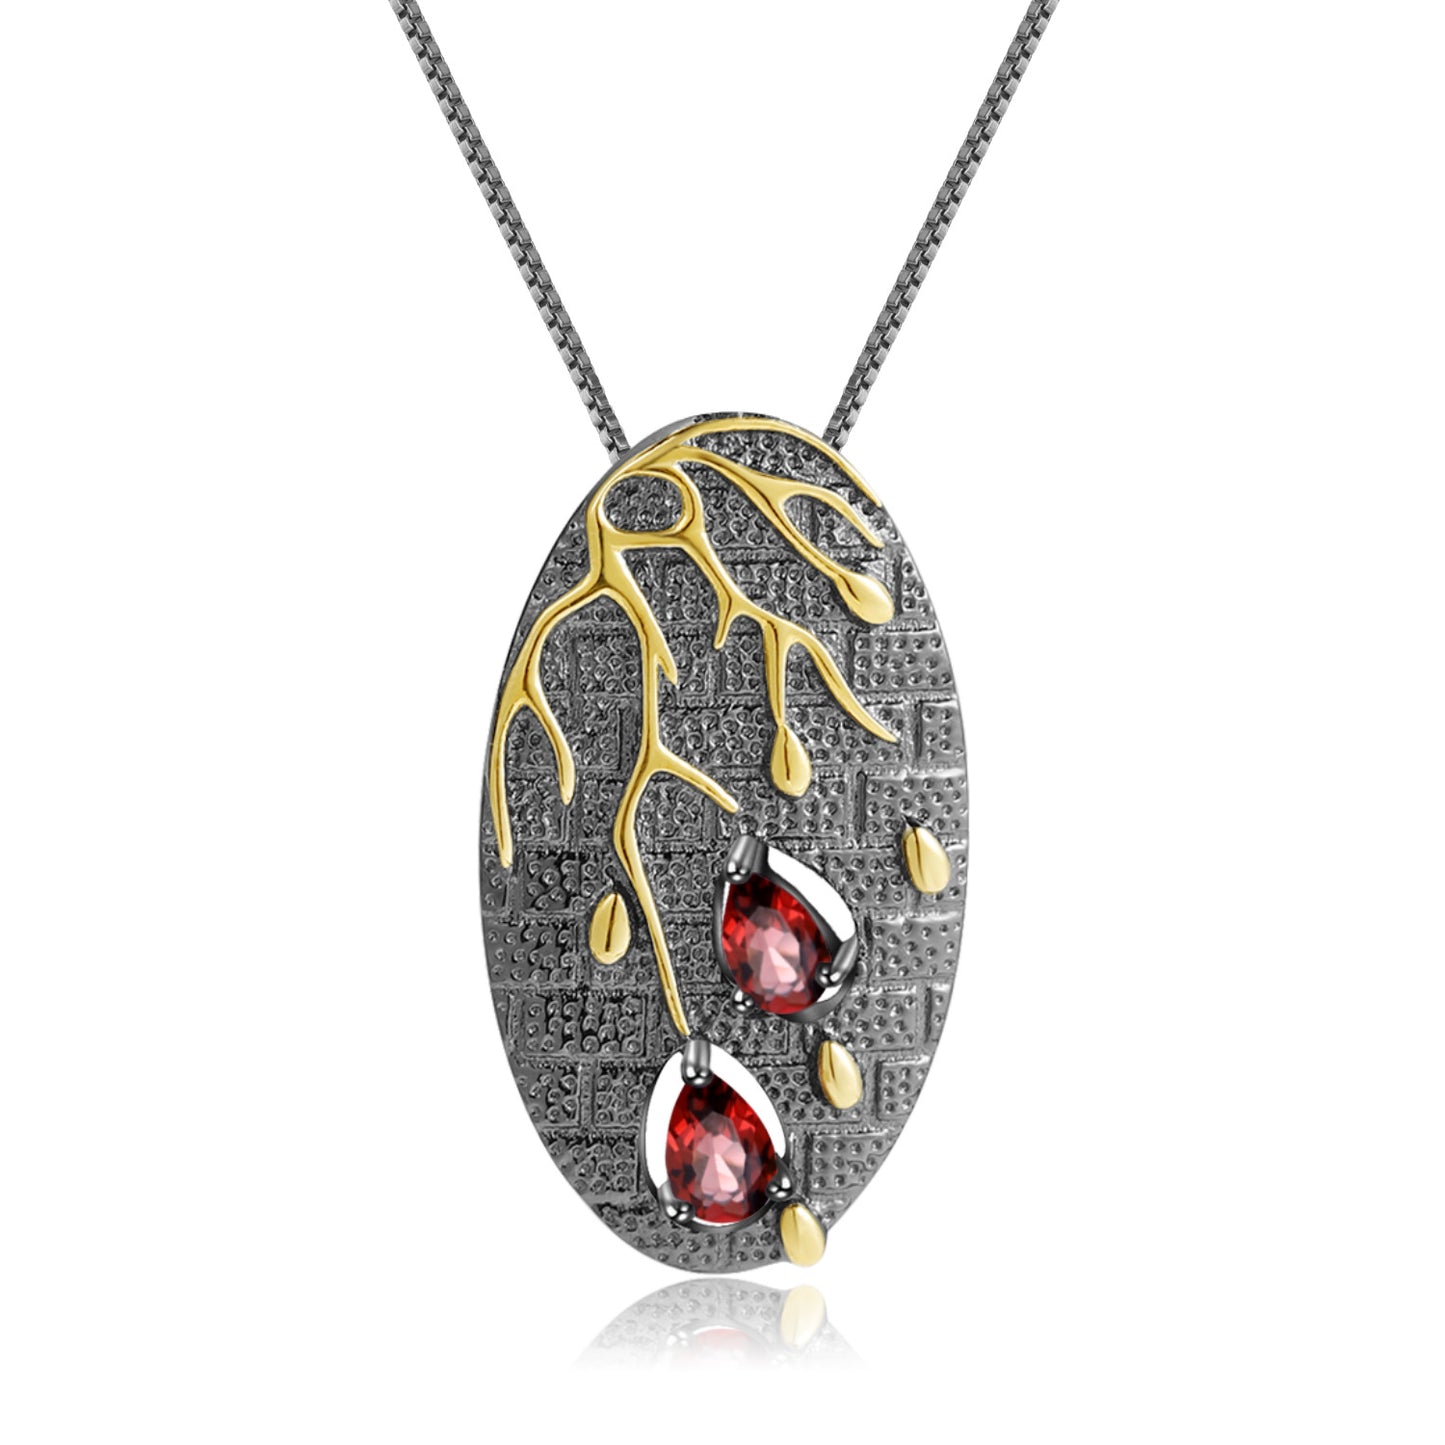 Georgia Premium Colourful Design Natural Gemstone Oval Pendant Sterling Silver Necklace for Women